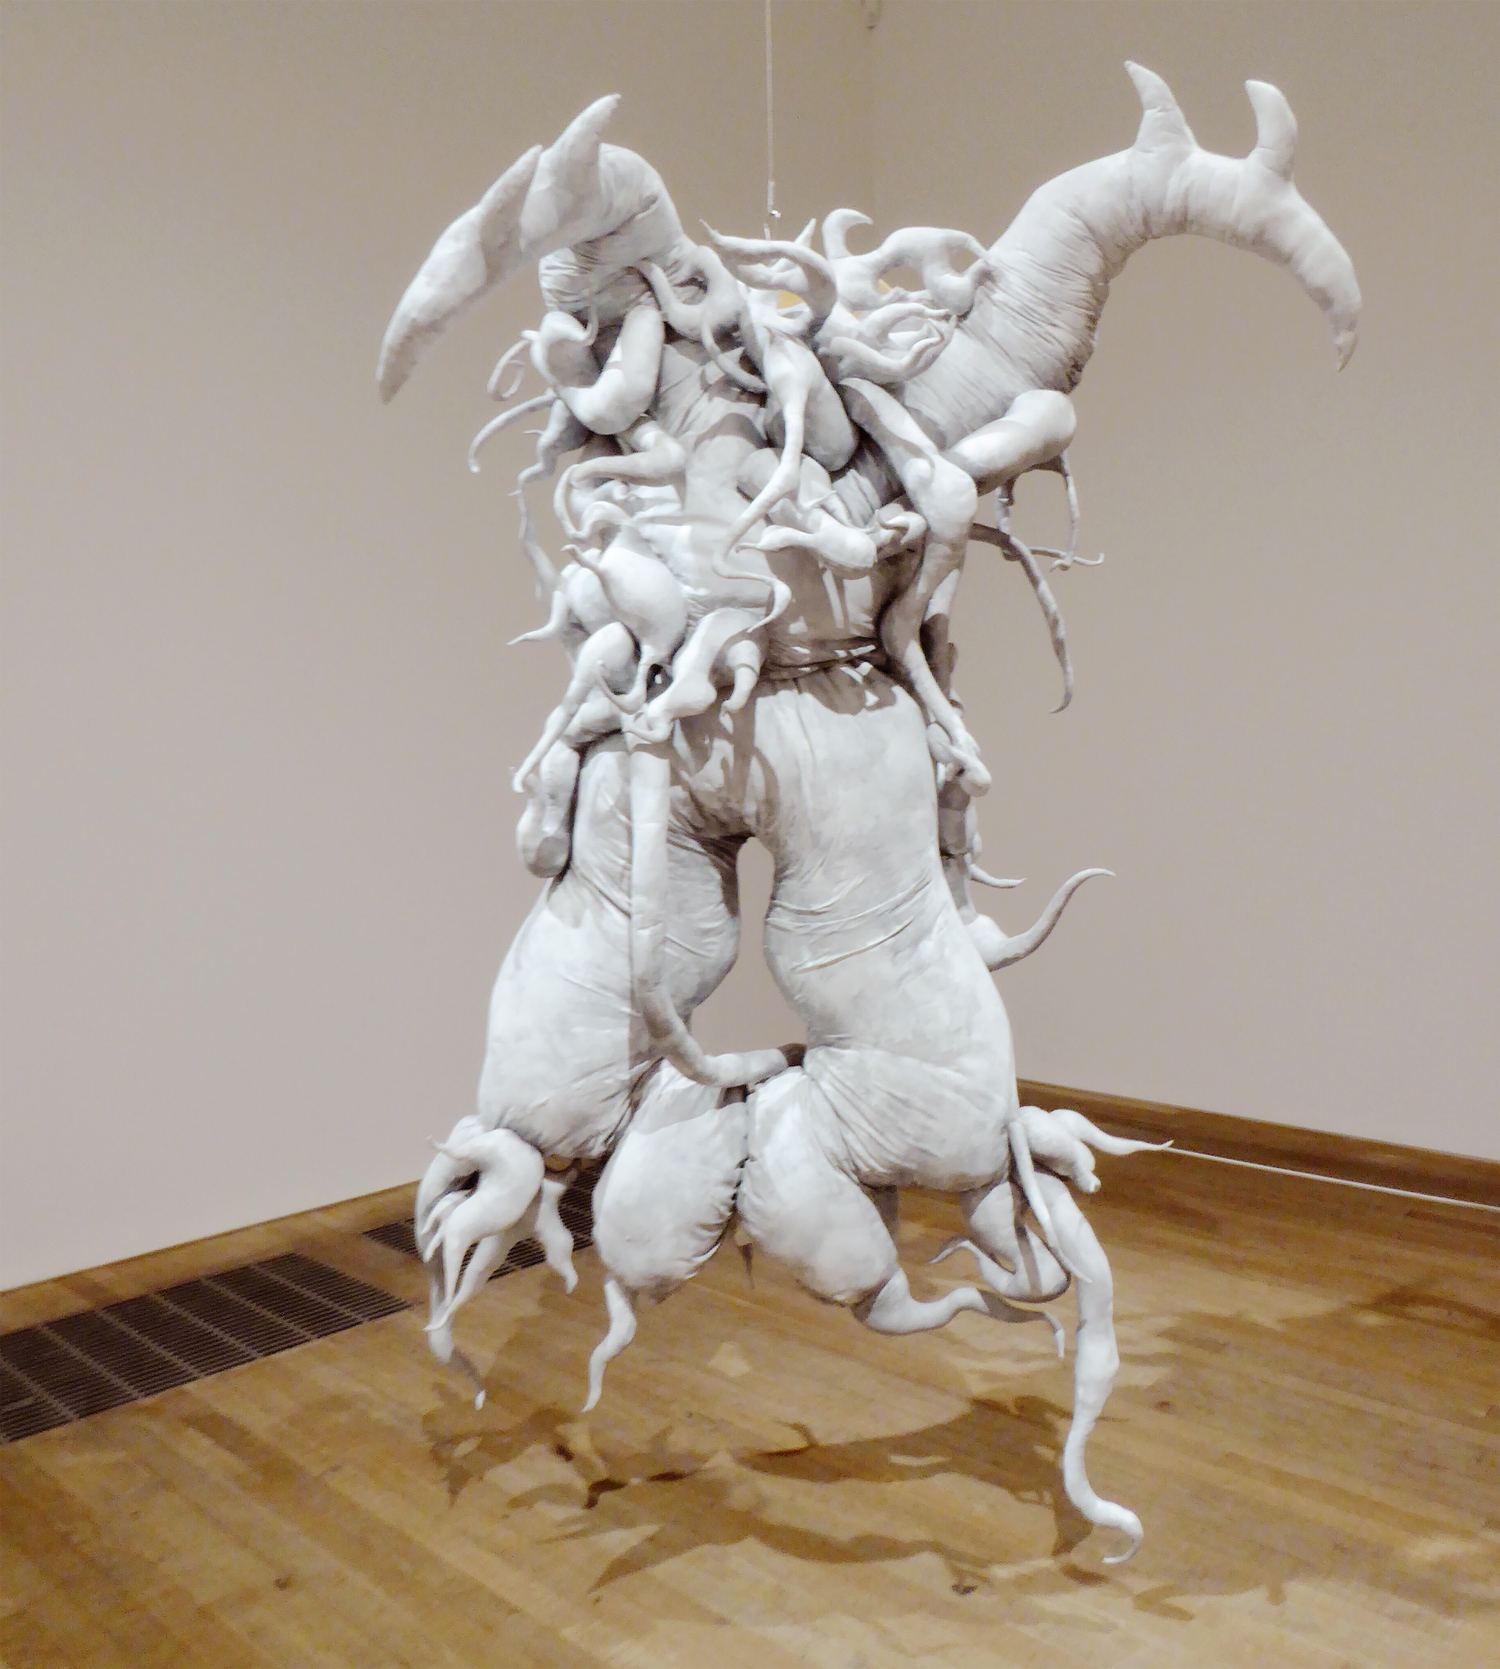 The Wick - Lee Bul, Untitled (Cravings White), 1988, reconstructed 2011